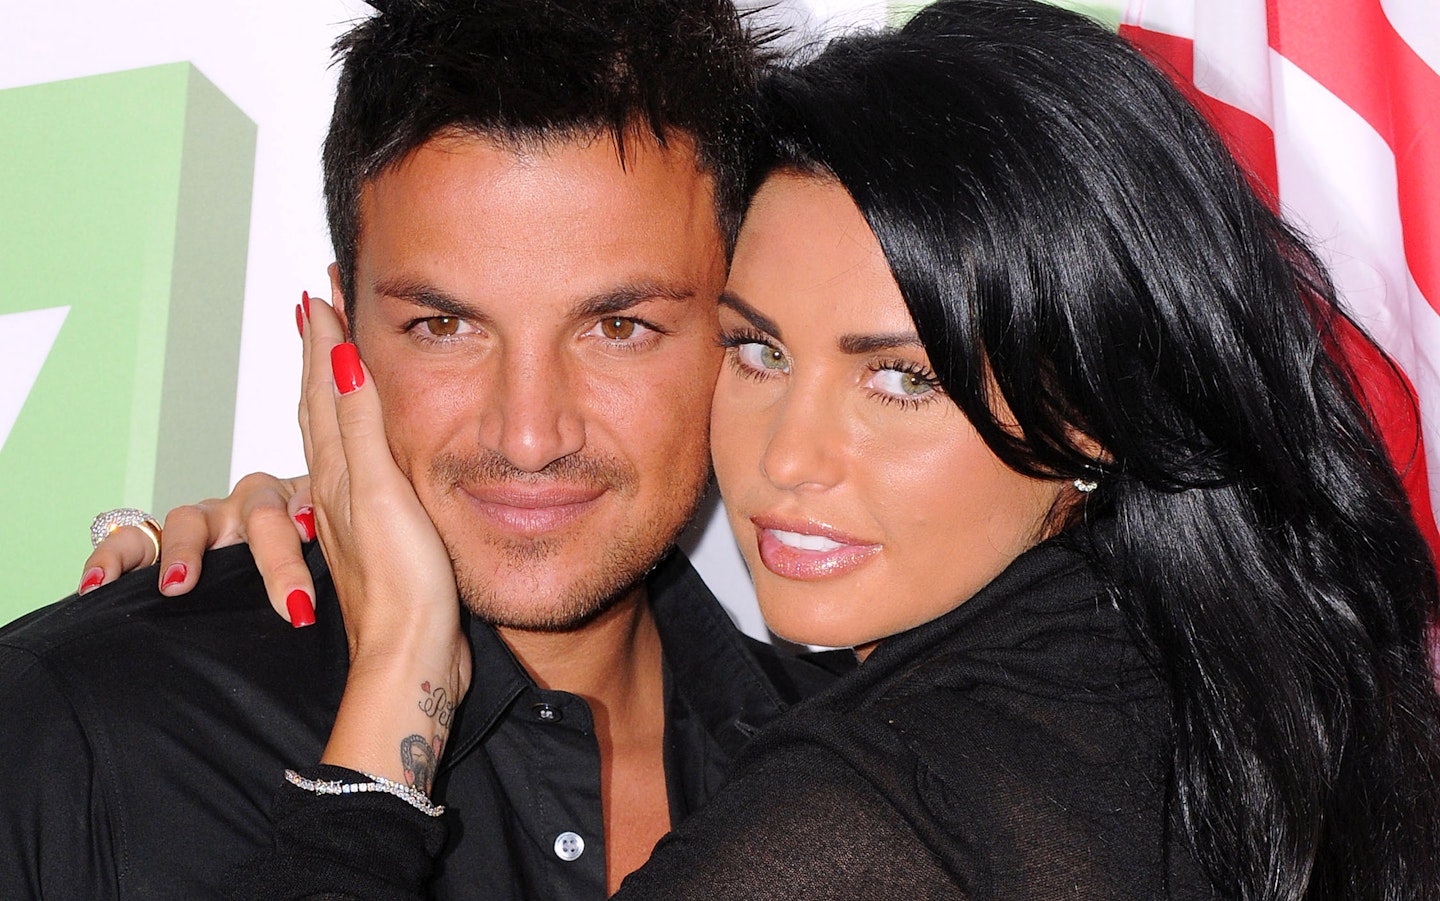 Katie Price and Peter Andre couple